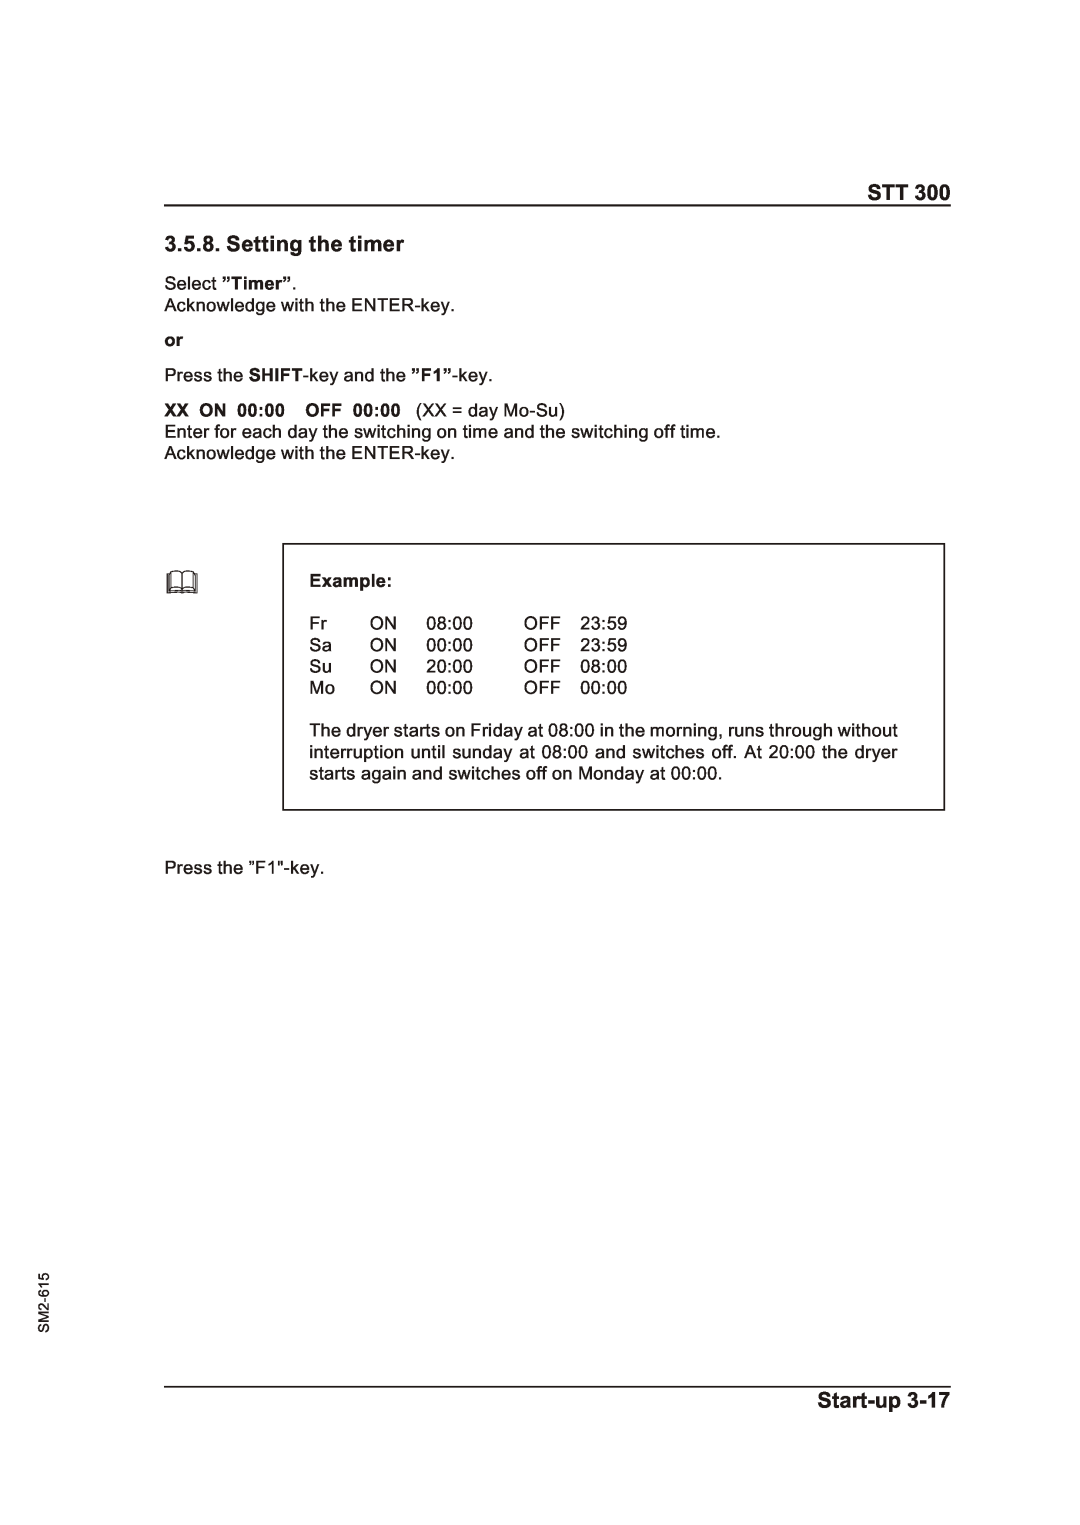 Sterling STT 300 operating instructions STT 3.5.8. Setting the timer, Start-up, XX ON 00 00 OFF 00 00 XX = day Mo-Su 